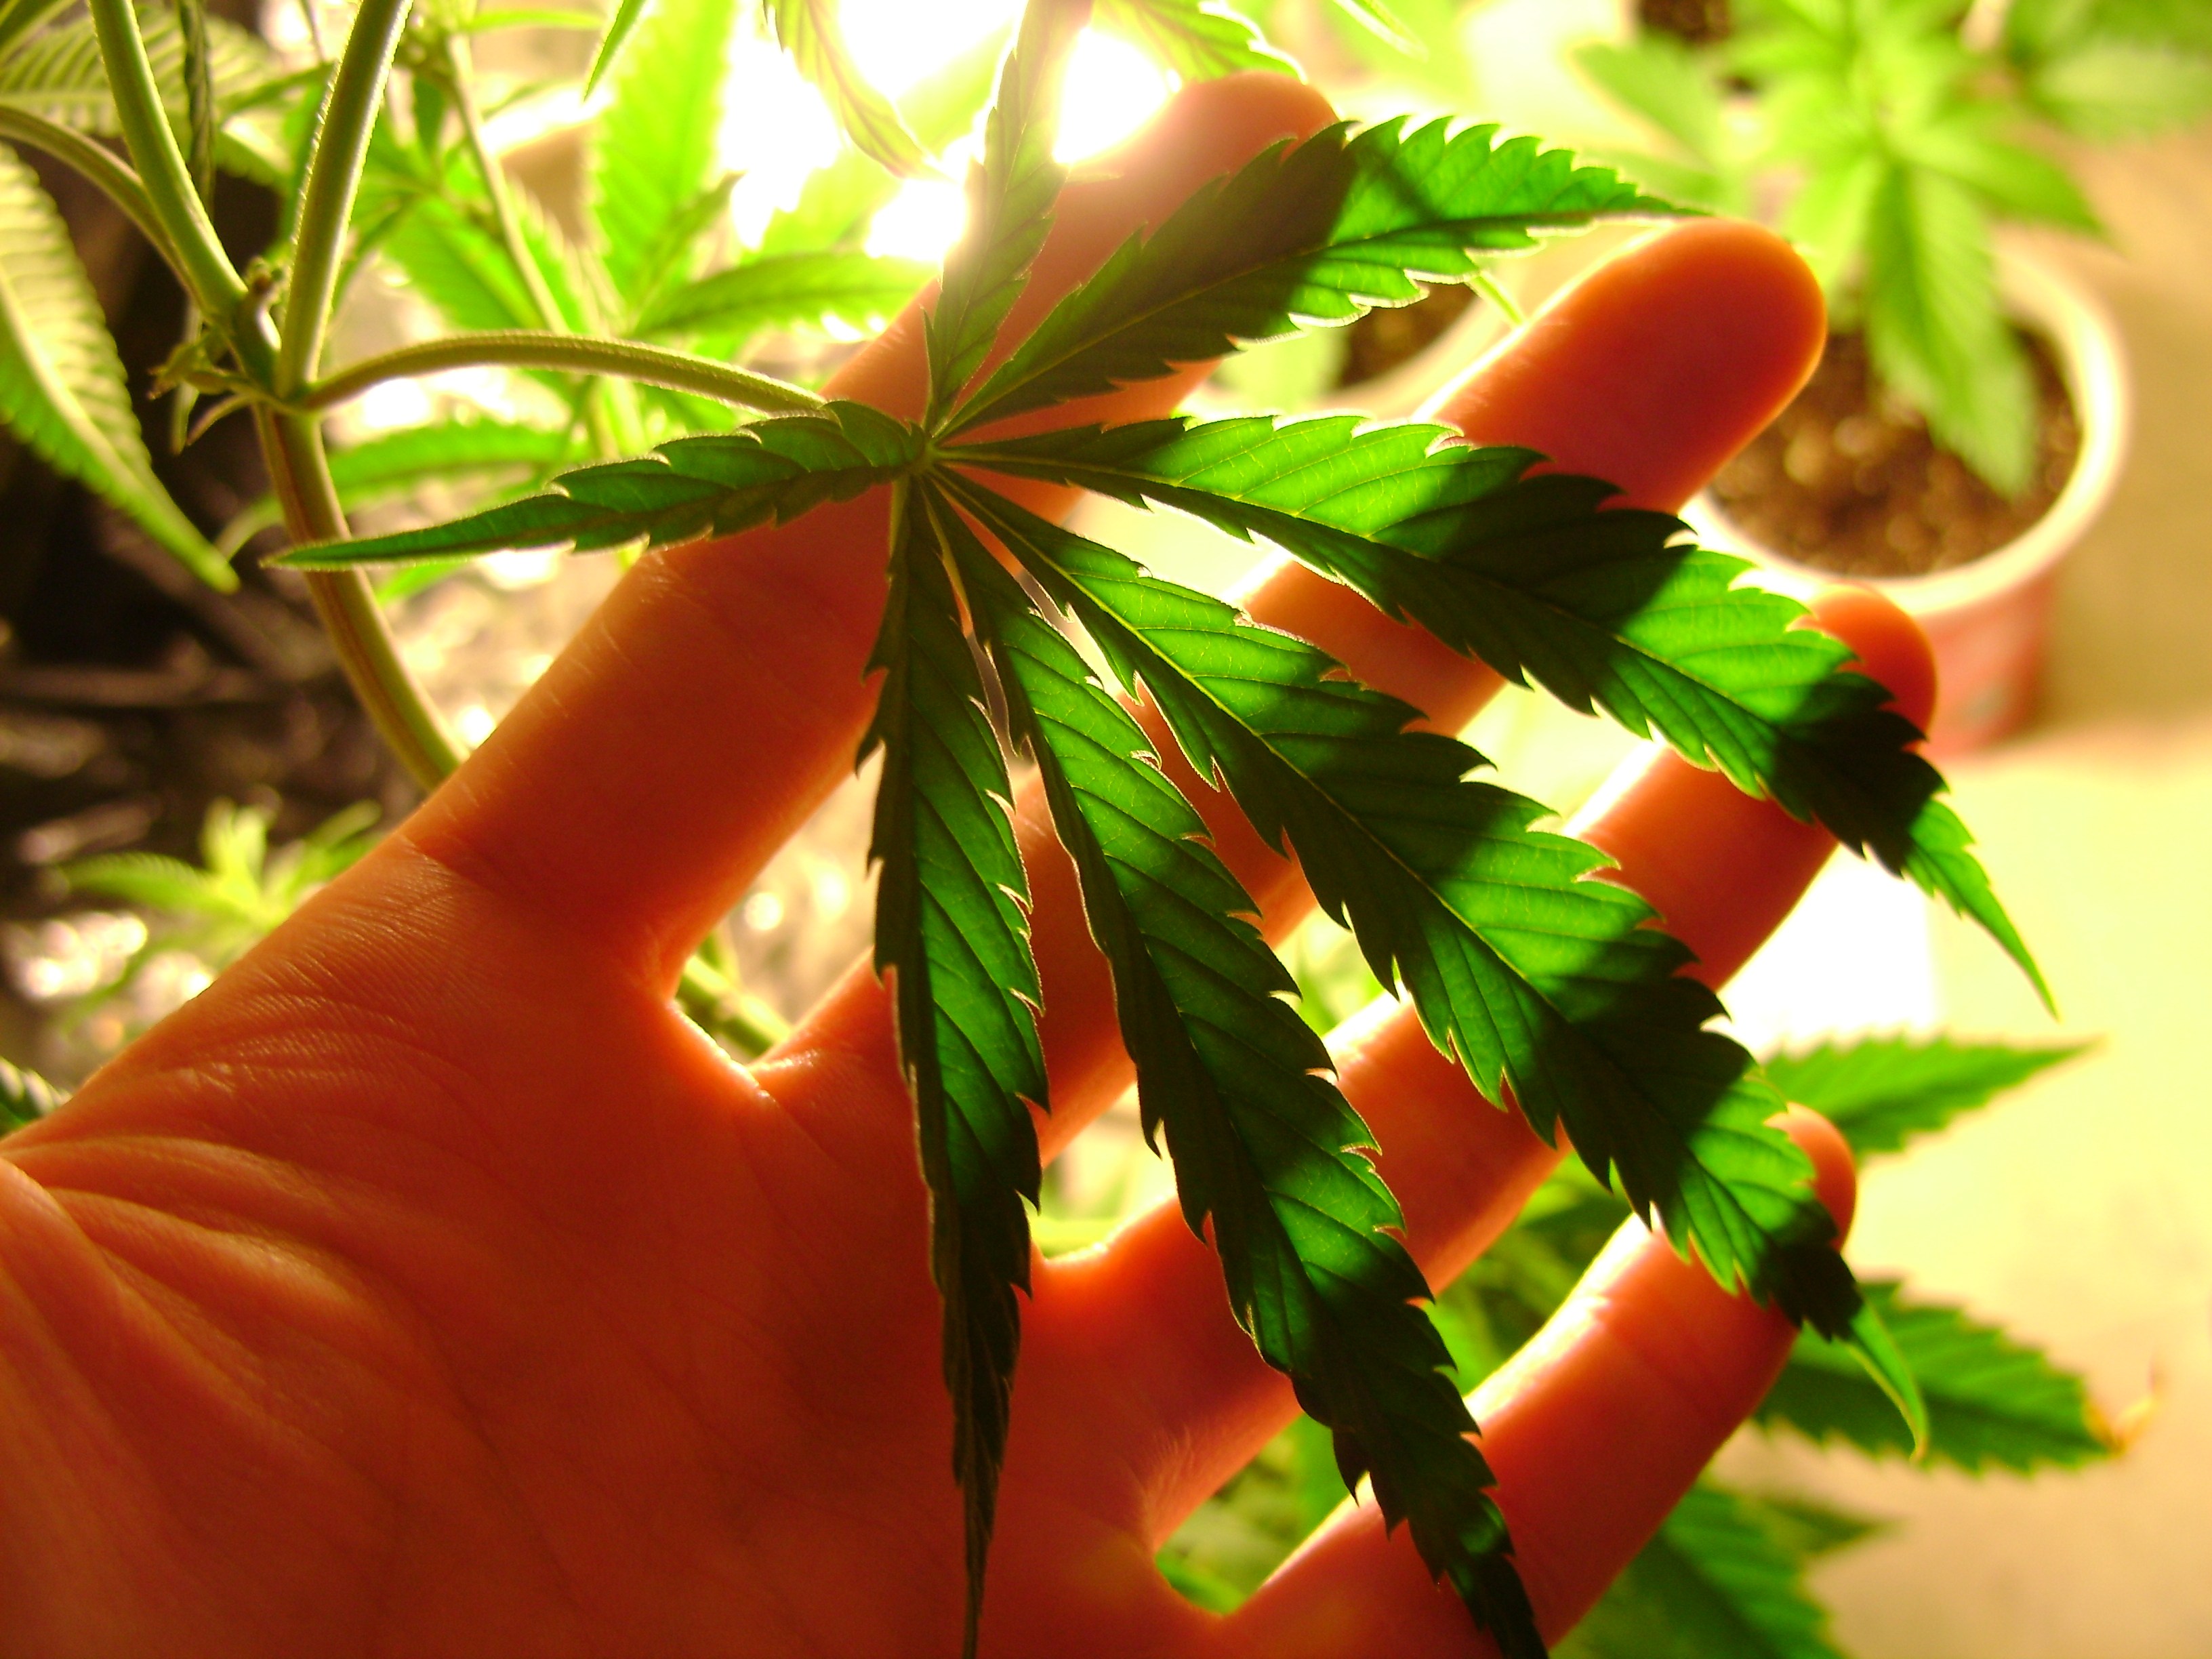 Medible review study cannabis use likely associated with reduced mental decline in hiv patients